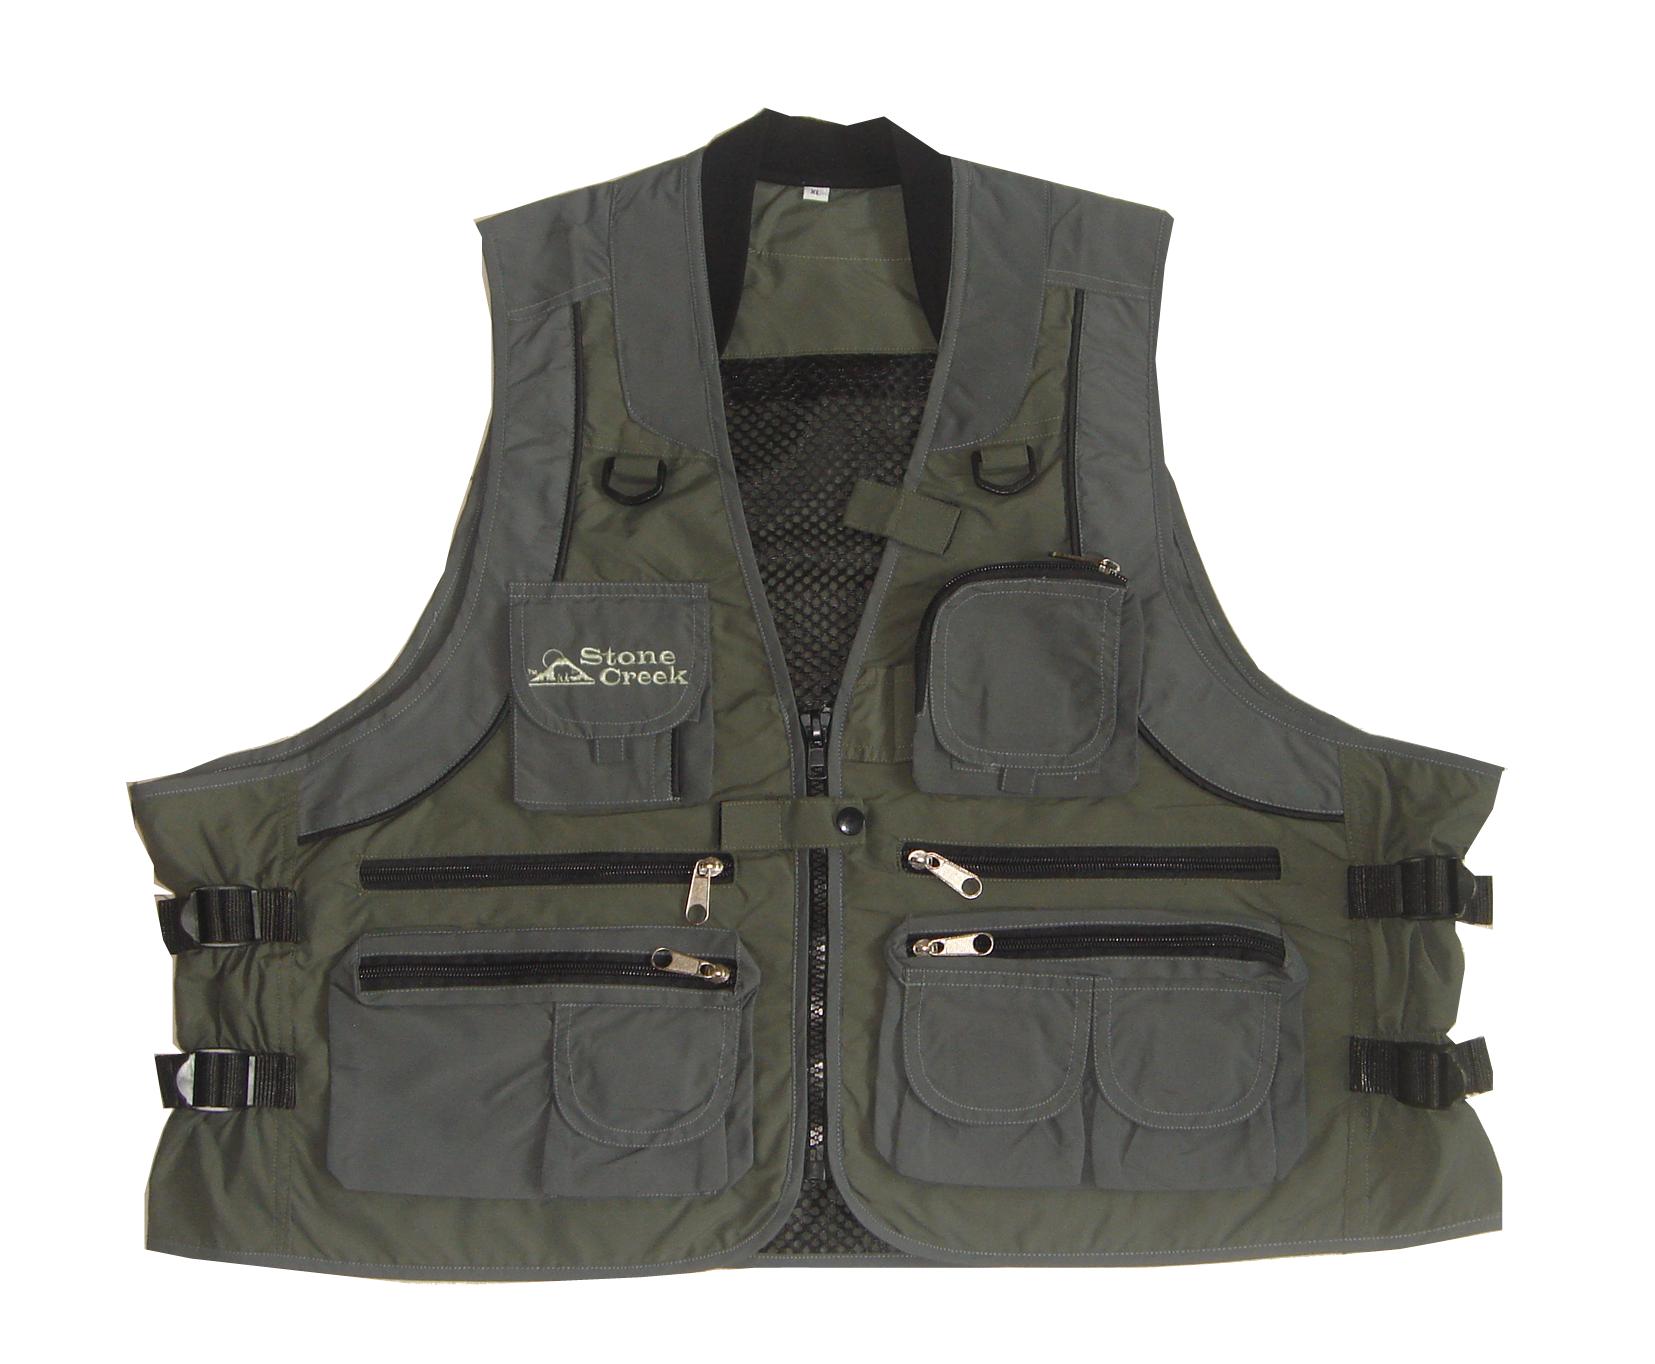 Fly Fishing Vests to Add to Your Gear Collection - Rod and Reel Fly Fishing